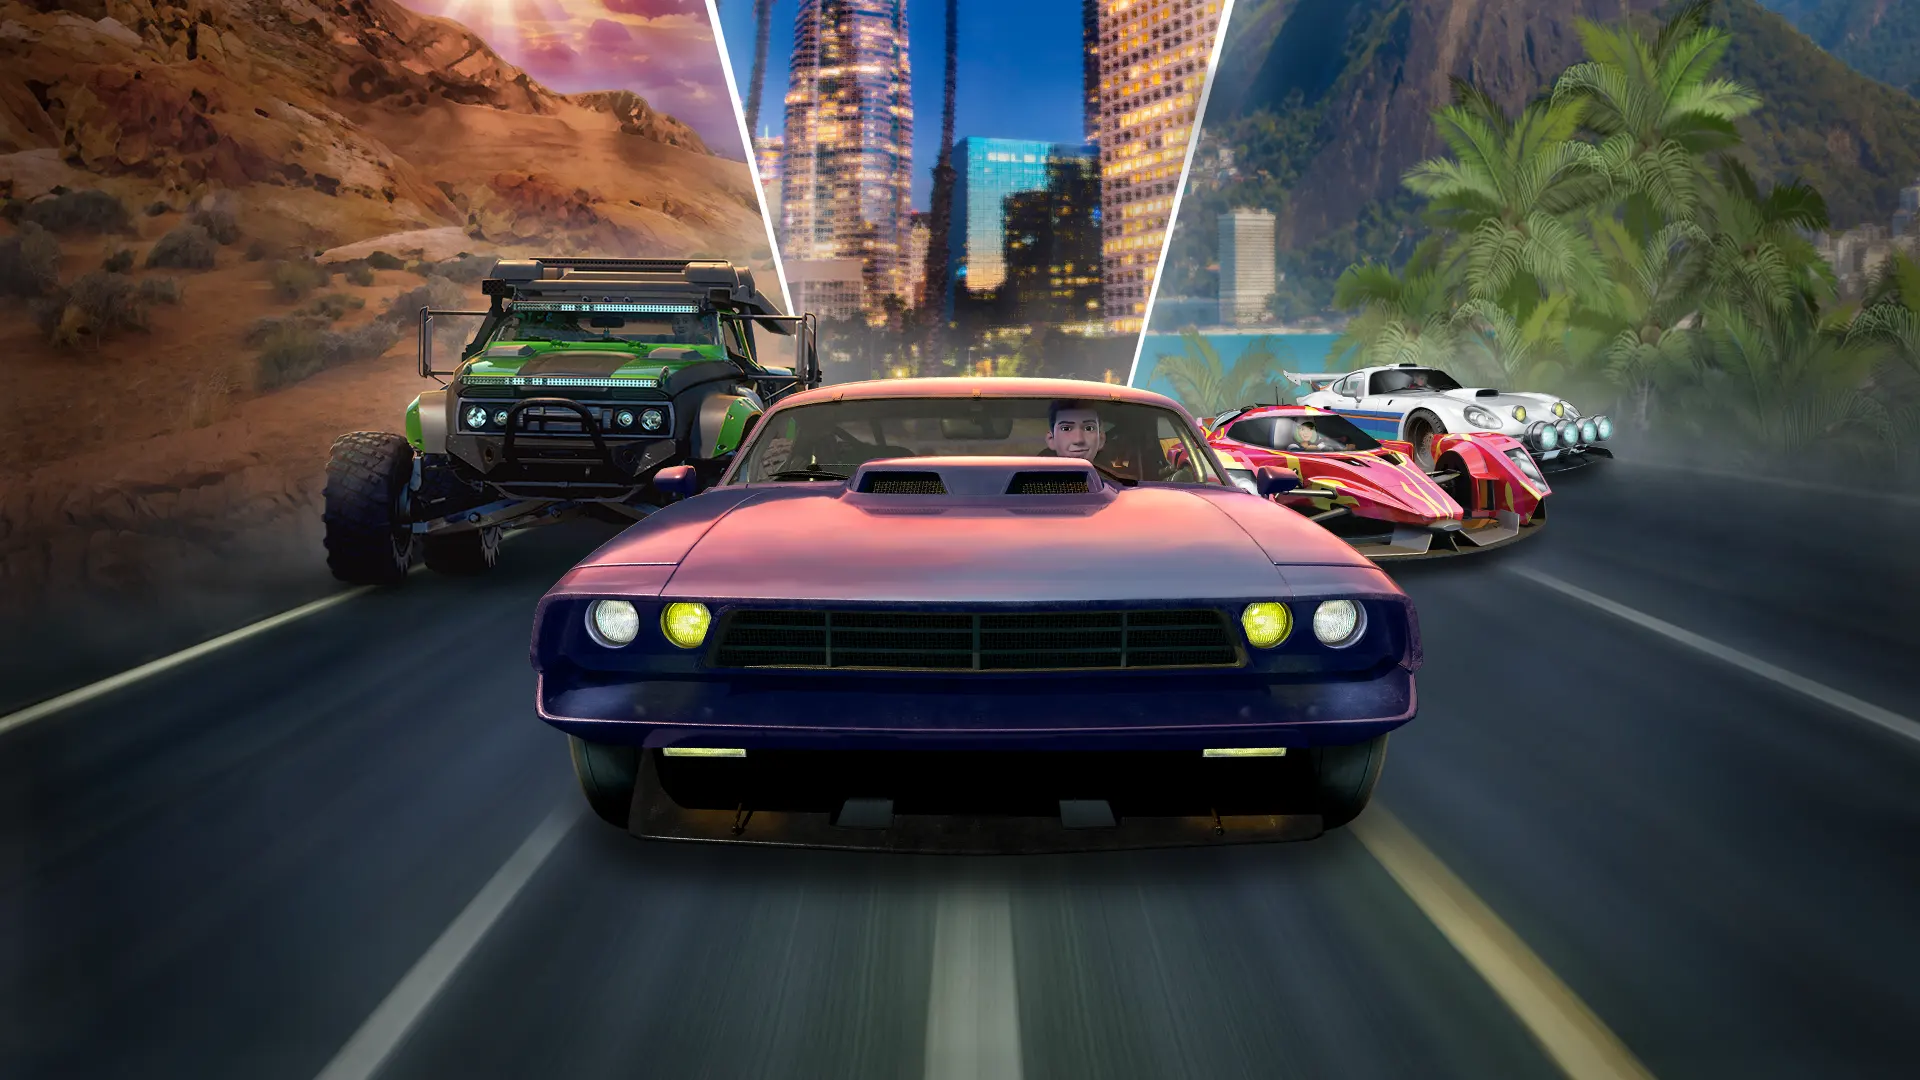 Fast & Furious: Spy Racers Rise of SH1FT3R - The Videogame